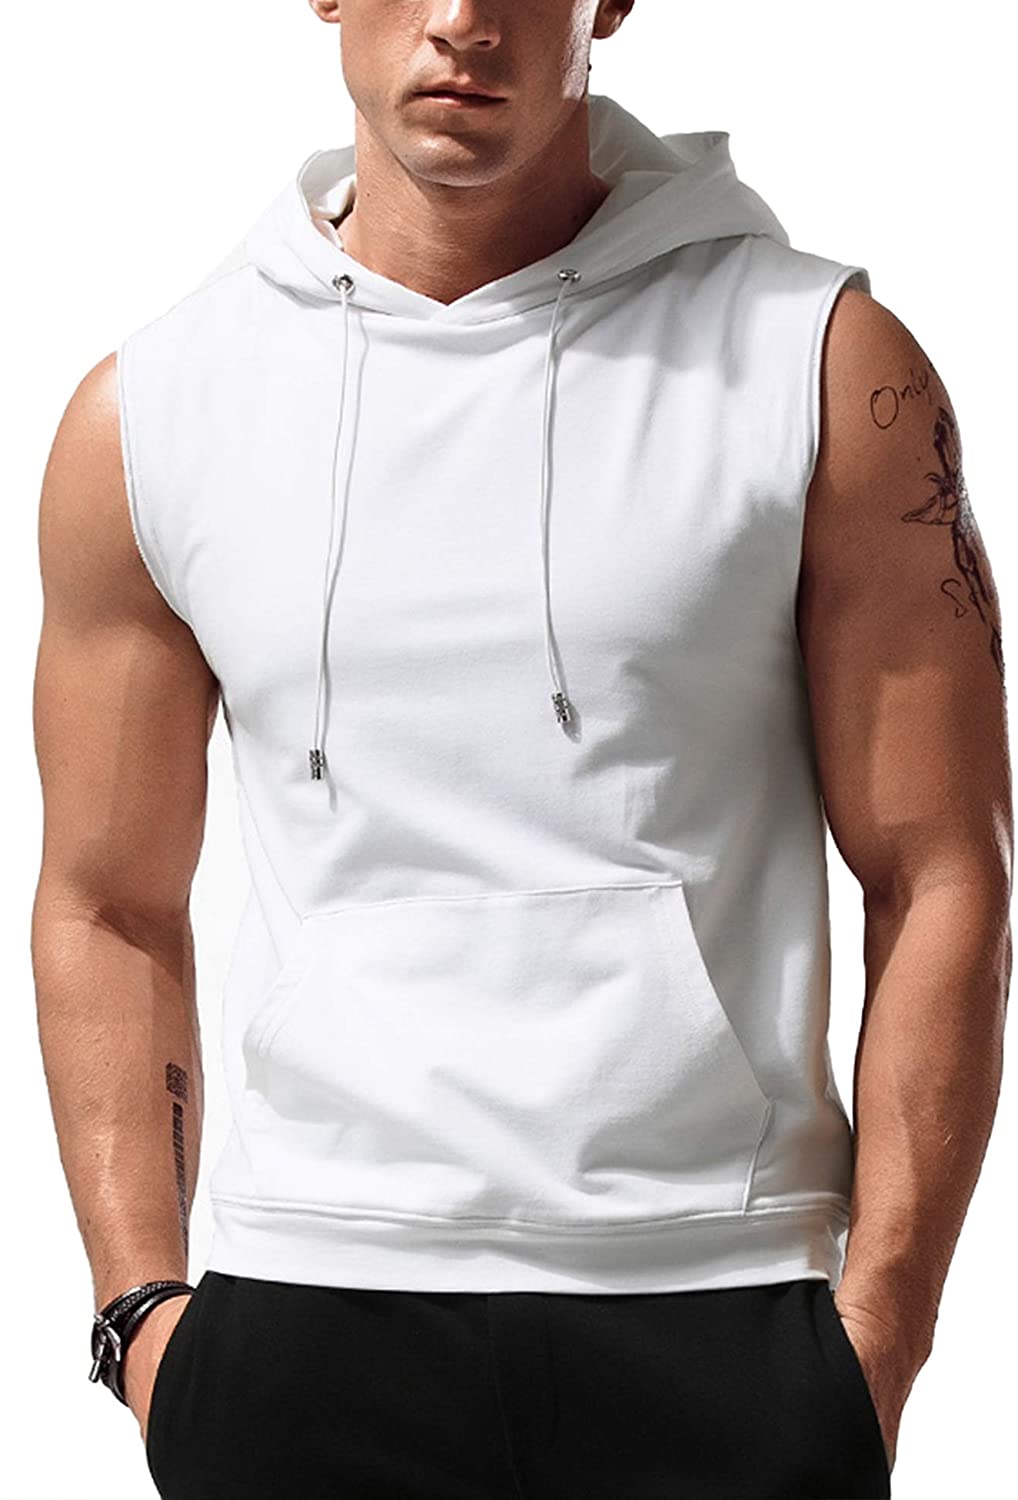 Babioboa Men's Workout Hooded Tank Tops Sleeveless Gym Hoodies Bodybuilding Muscle Shirts 